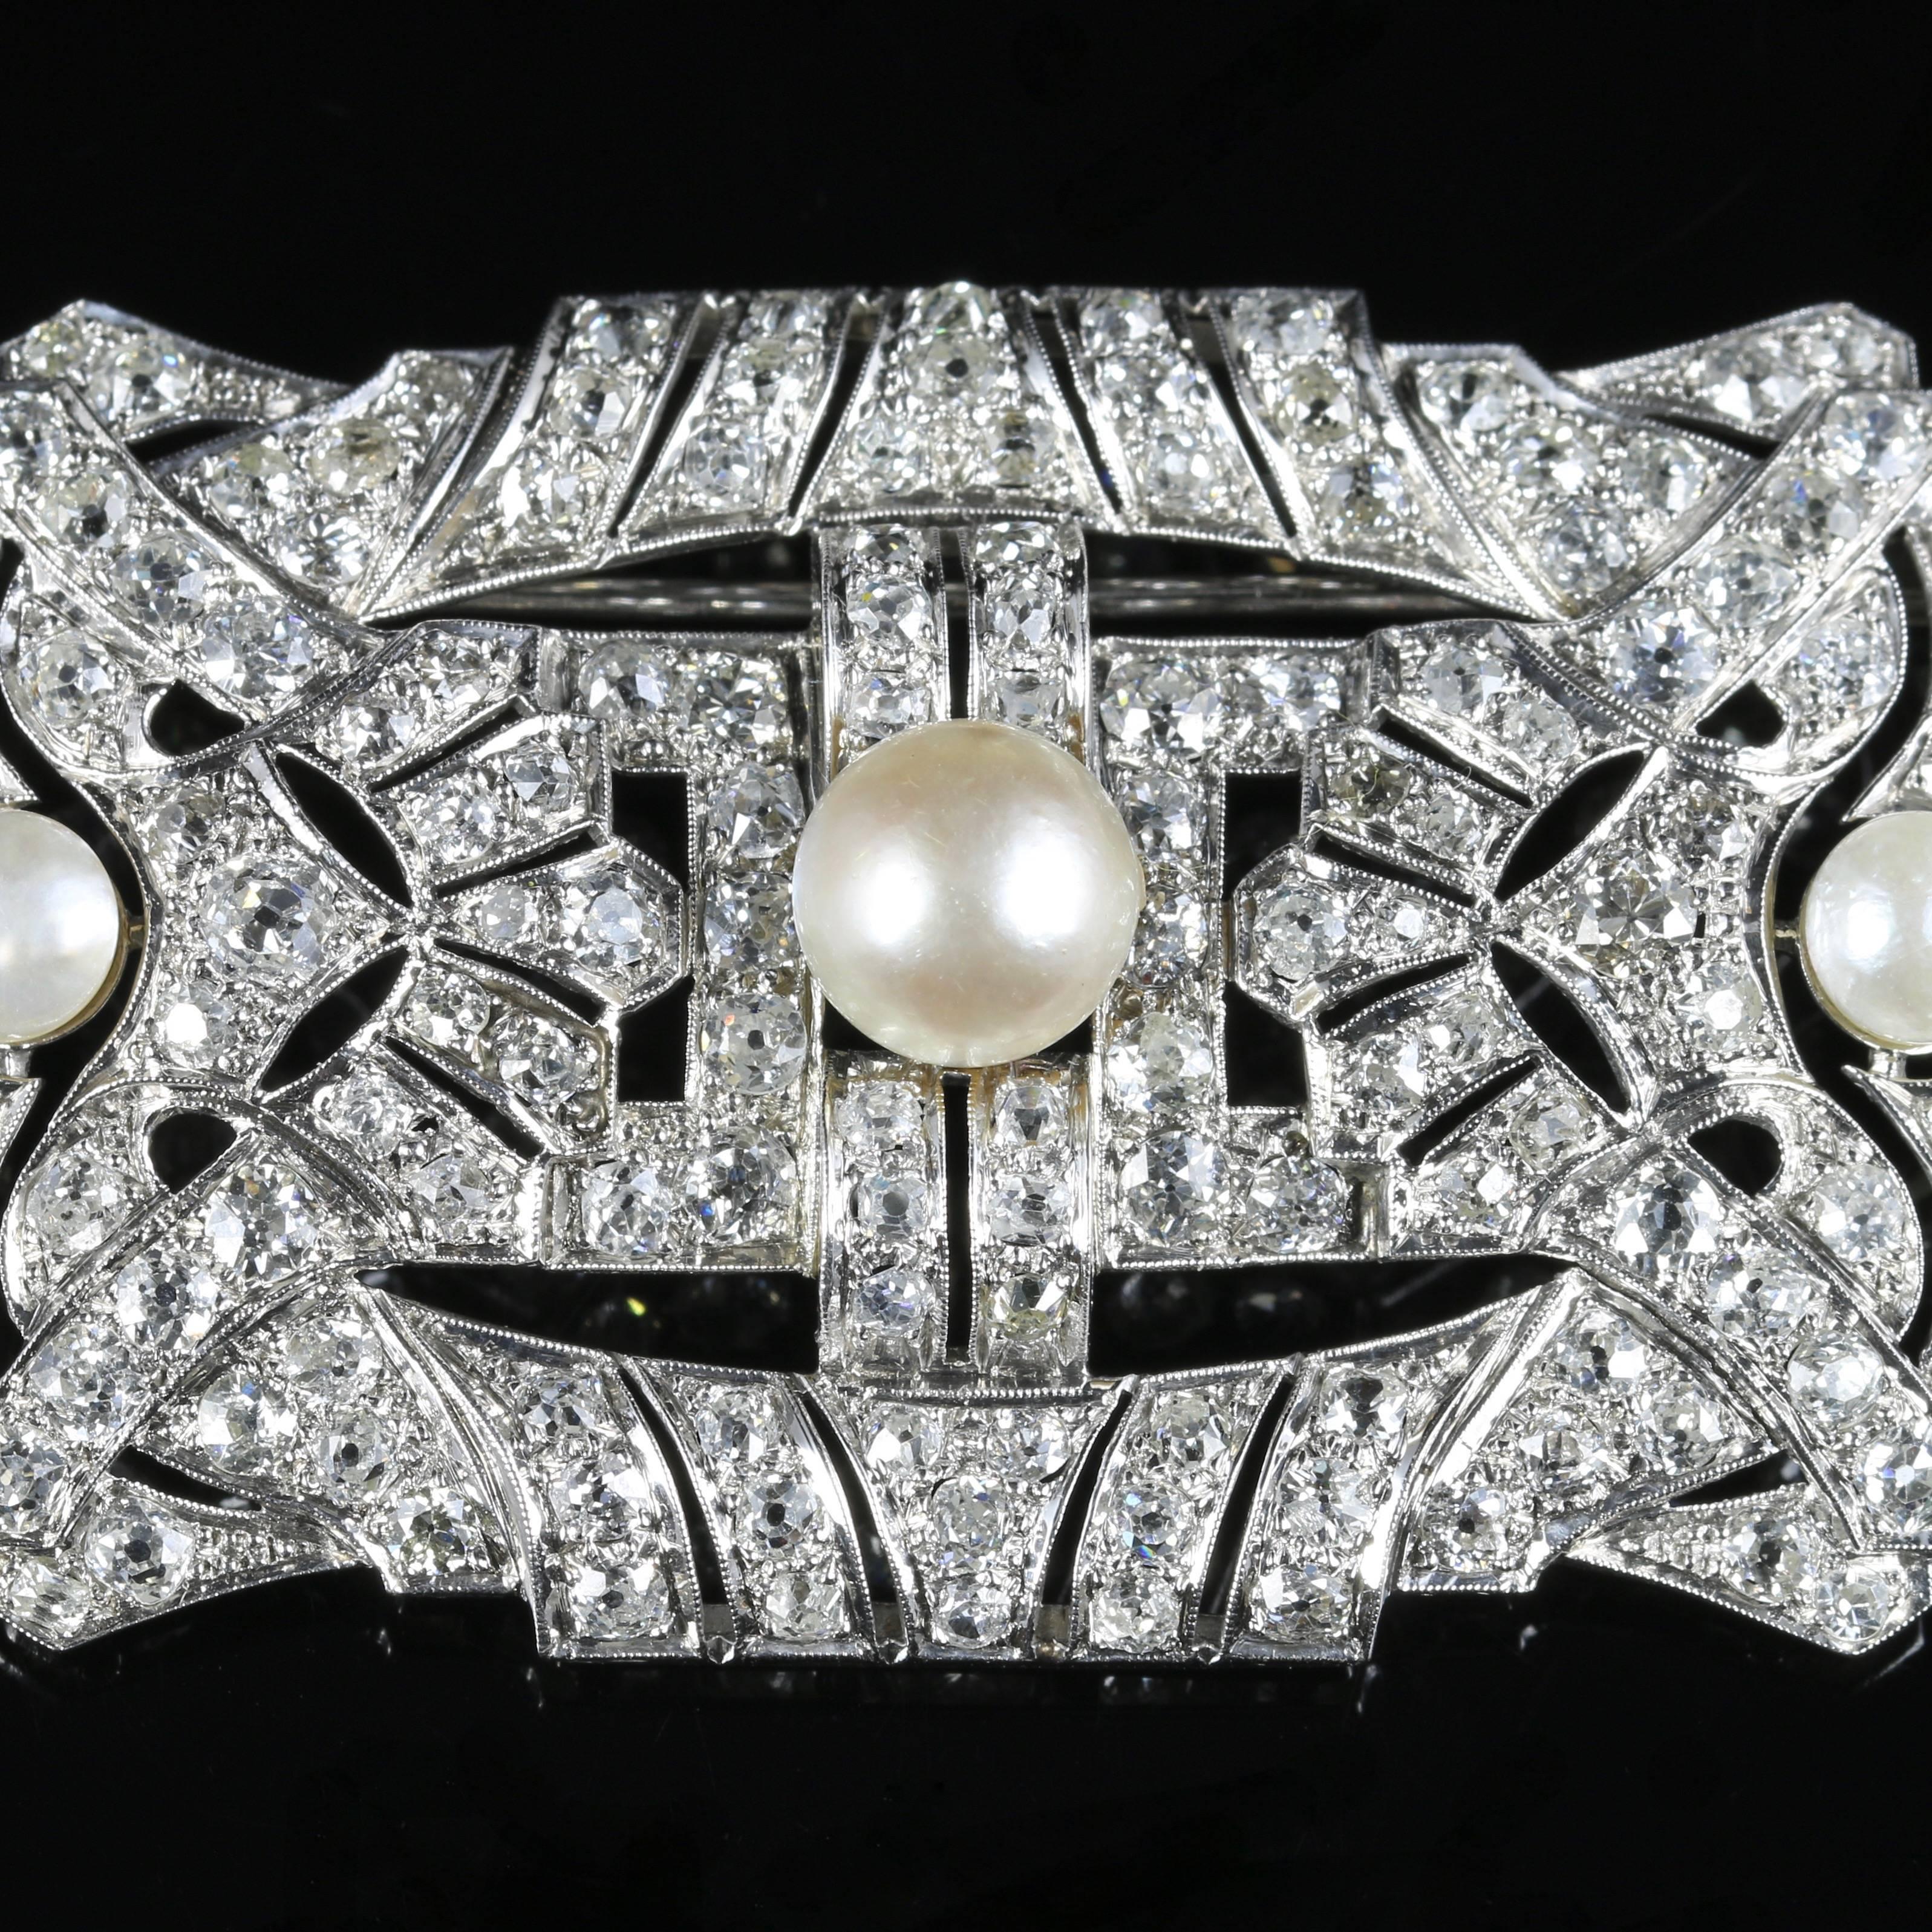 Antique Art Deco Diamond Pearl 18 Carat White Gold 11 Carat of Diamonds Brooch In Excellent Condition For Sale In Lancaster, Lancashire